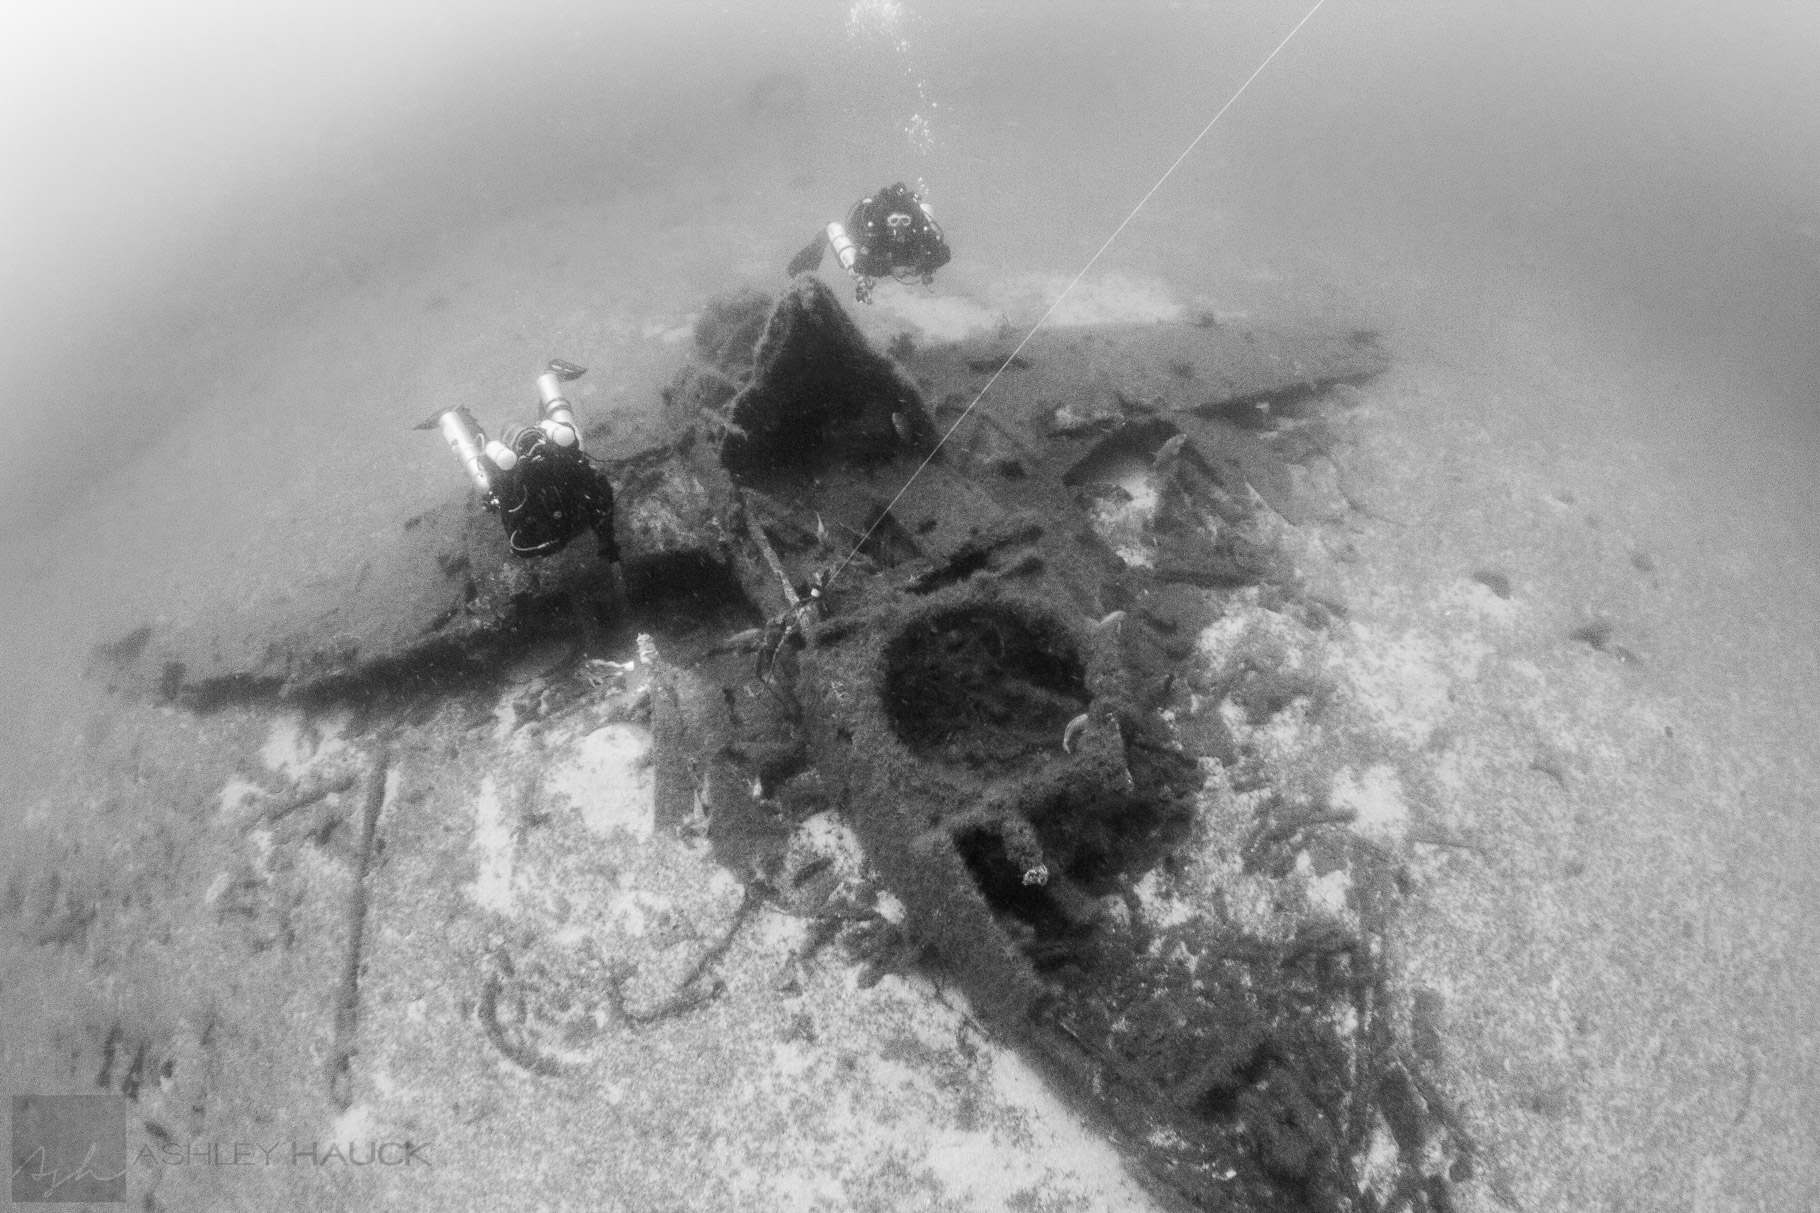 The TBM/TBF Avenger wreck in Anacapa with two rebreather divers on it.